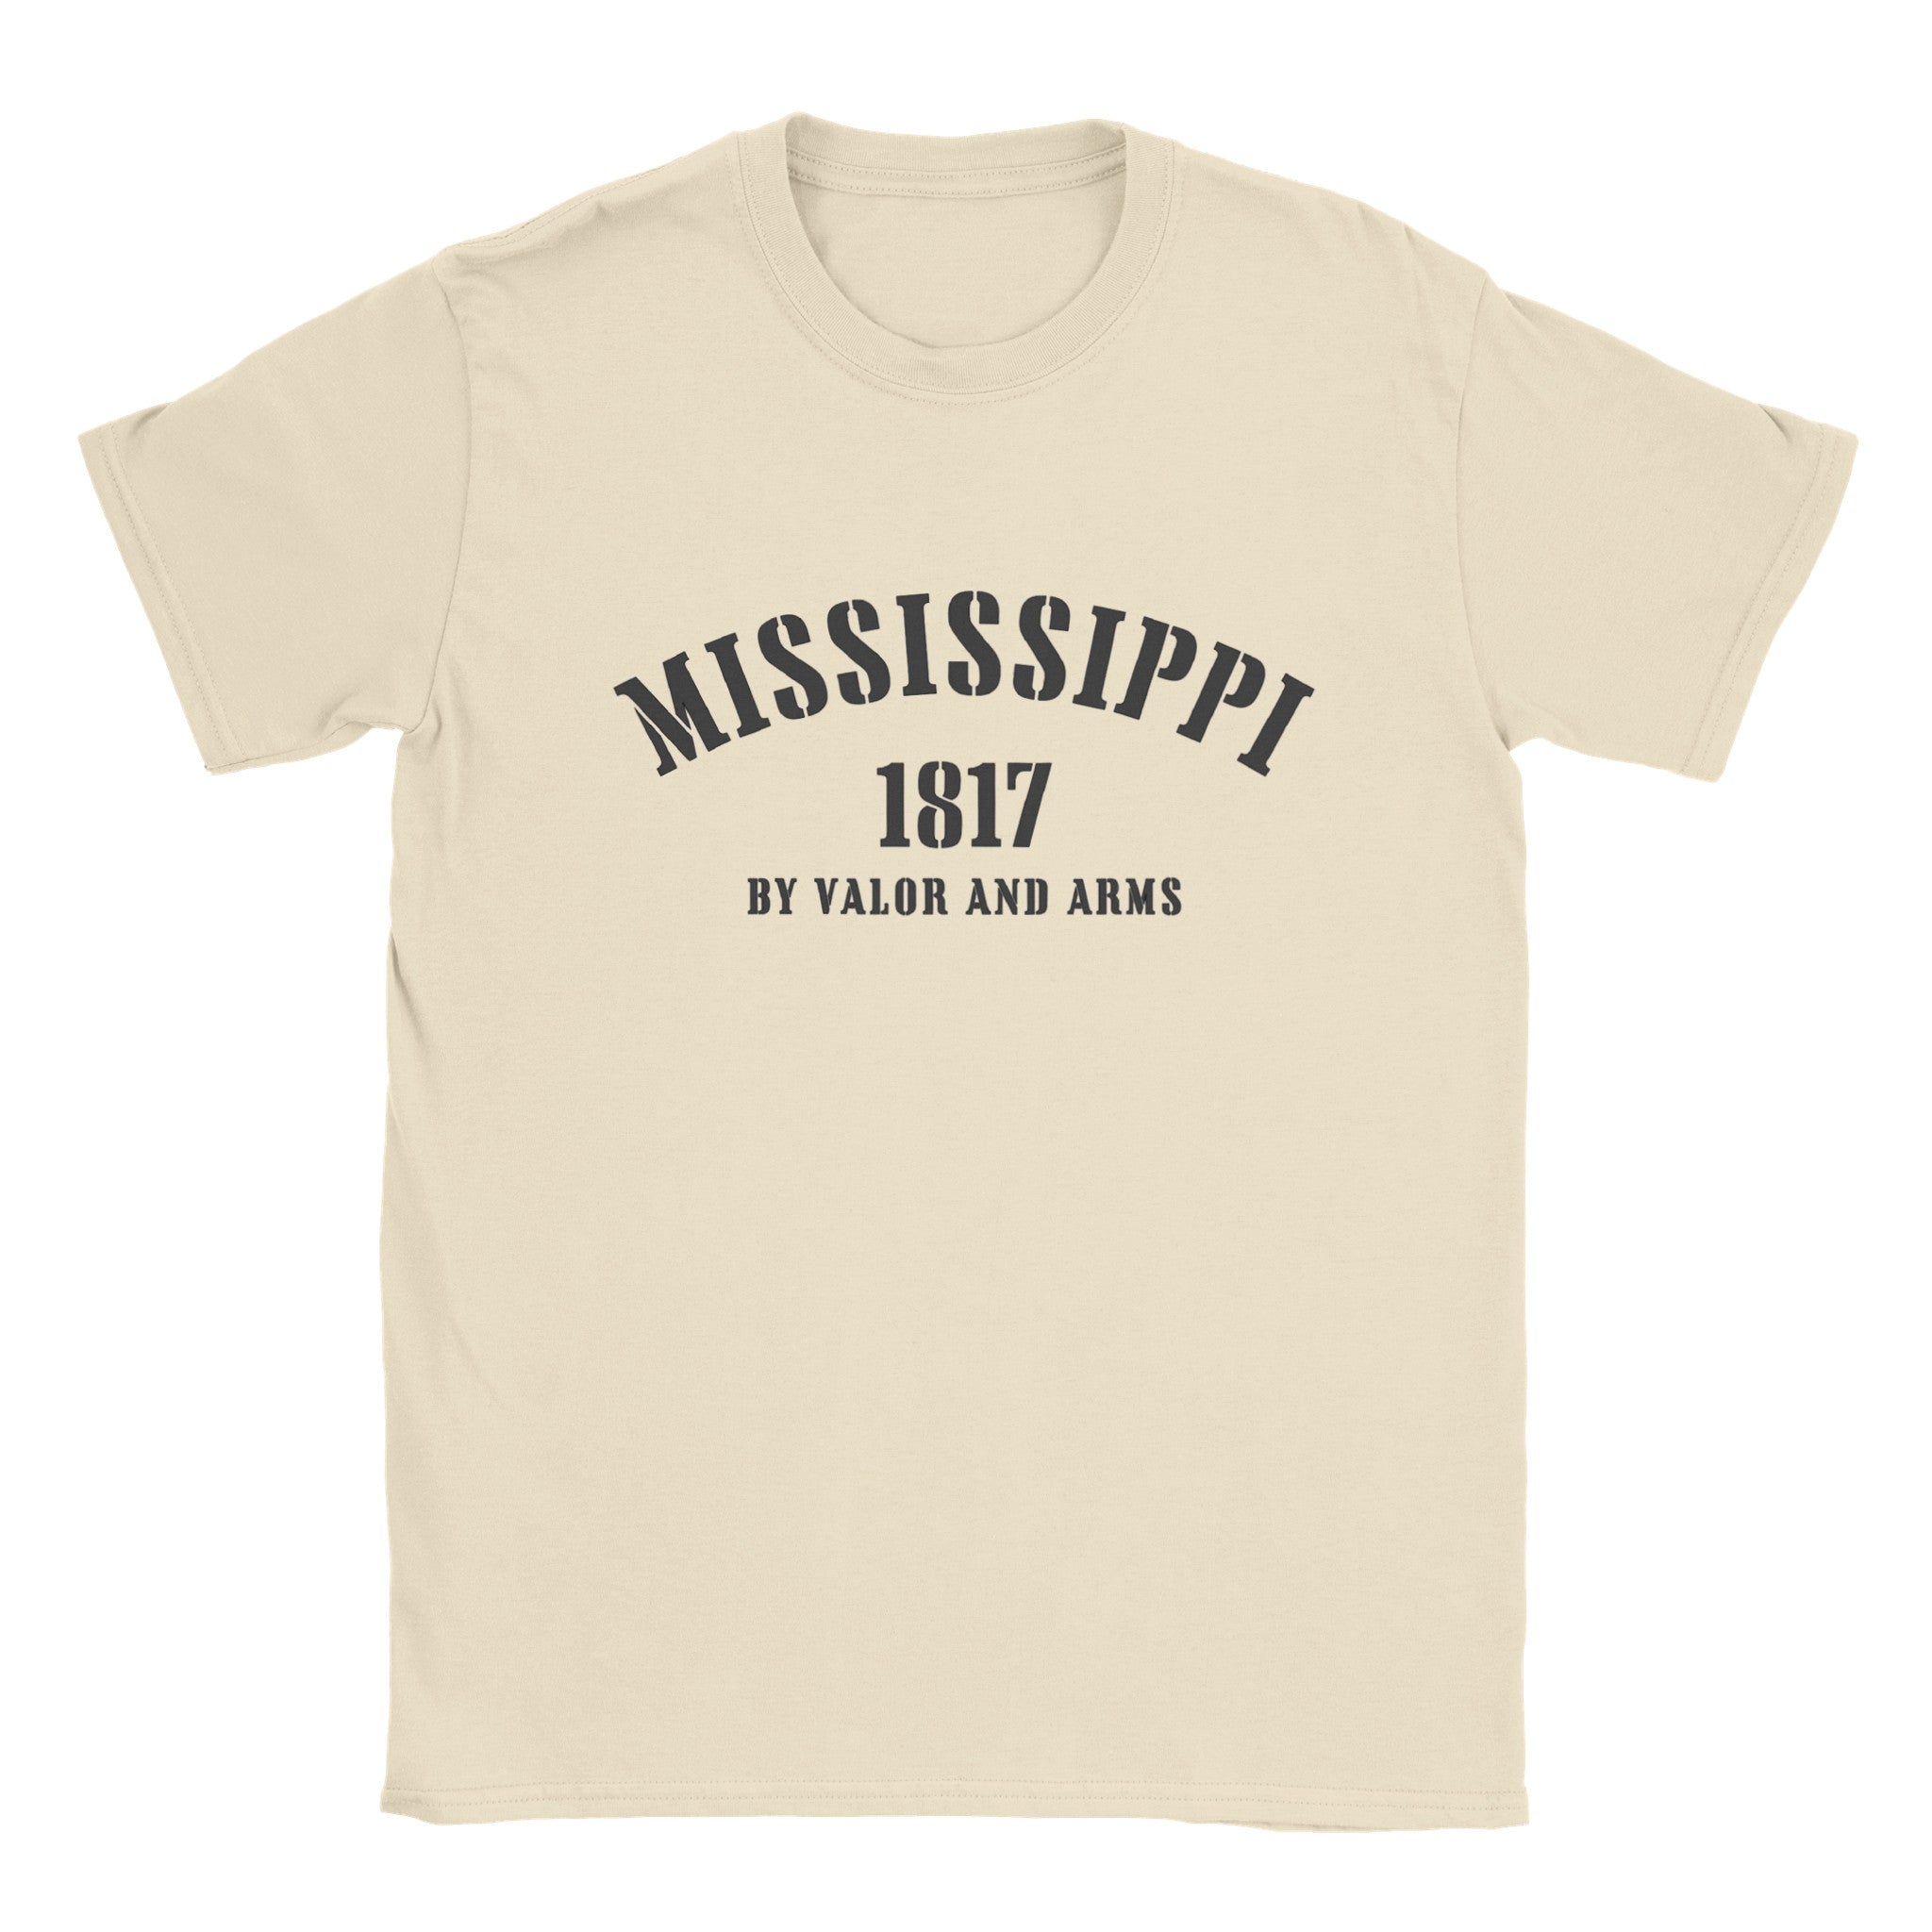 Mississippi- Classic Unisex Crewneck States T-shirt - Creations by Chris and Carlos